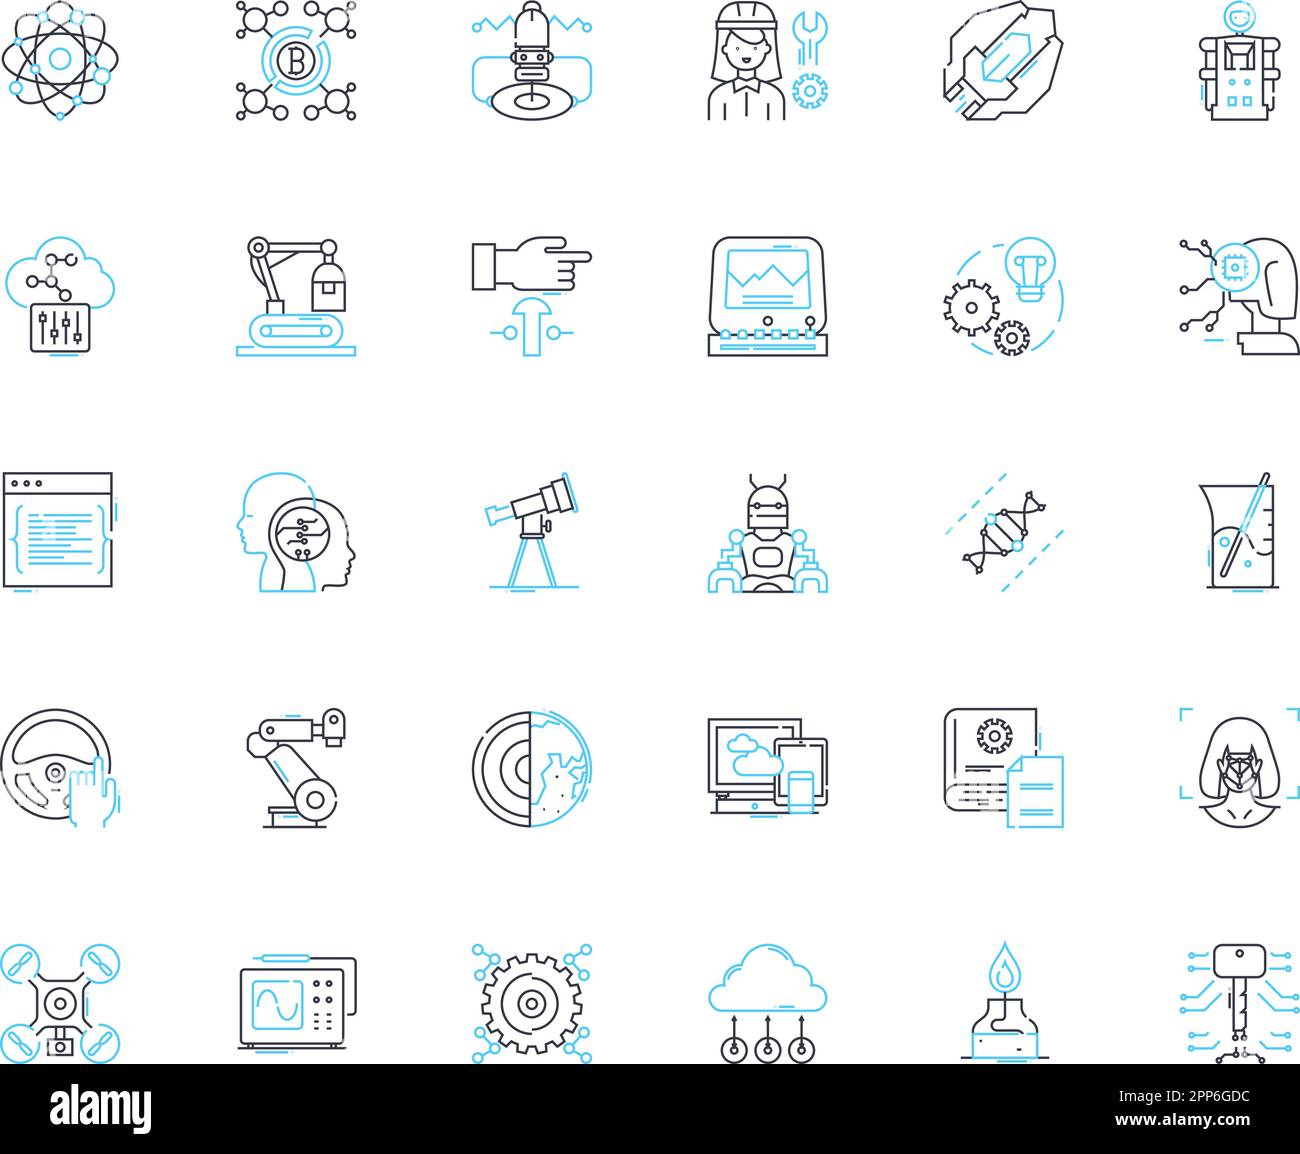 Imitation innovation linear icons set. Mimicry, Replication, Copying, Emulation, Impersonation, Reenactment, Reduplication line vector and concept Stock Vector